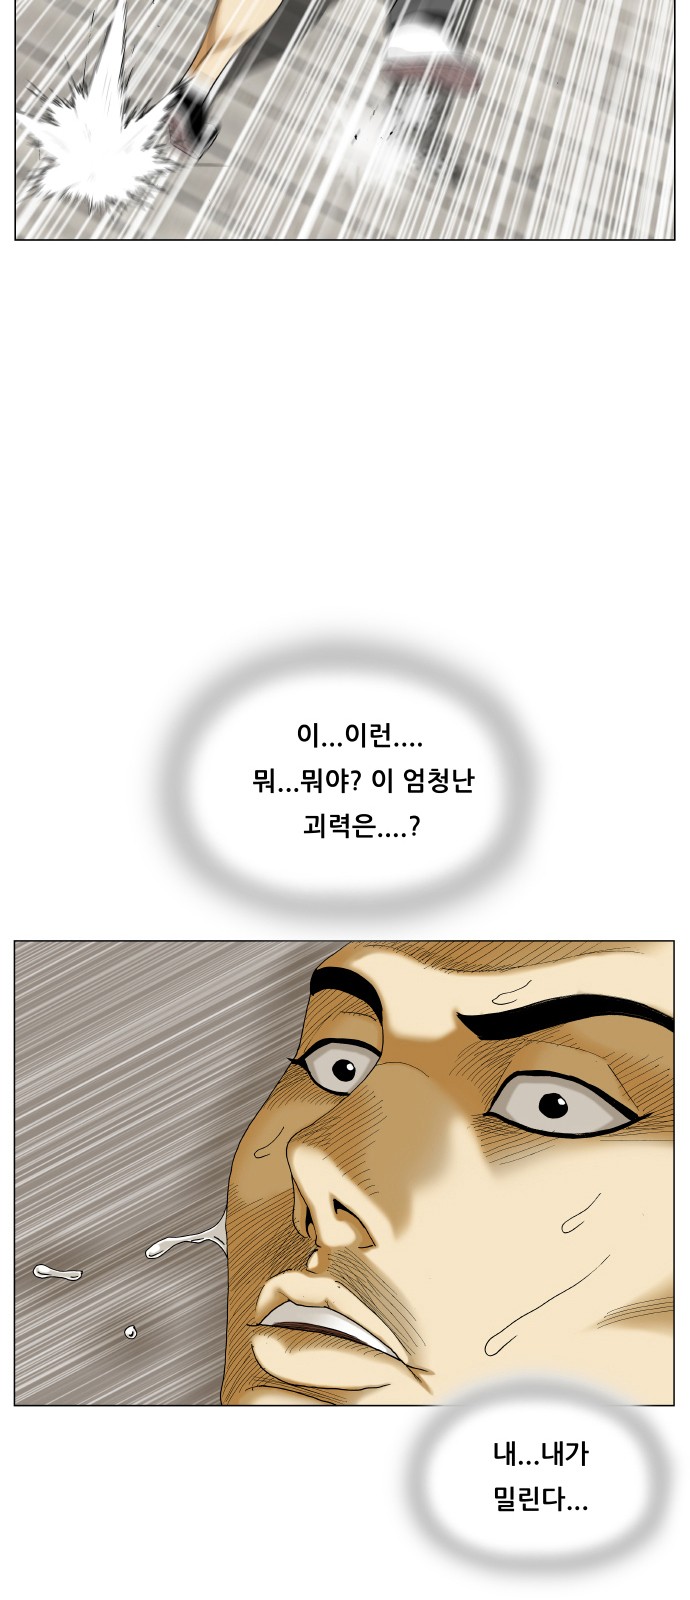 Ultimate Legend - Kang Hae Hyo - Chapter 461 - Page 5